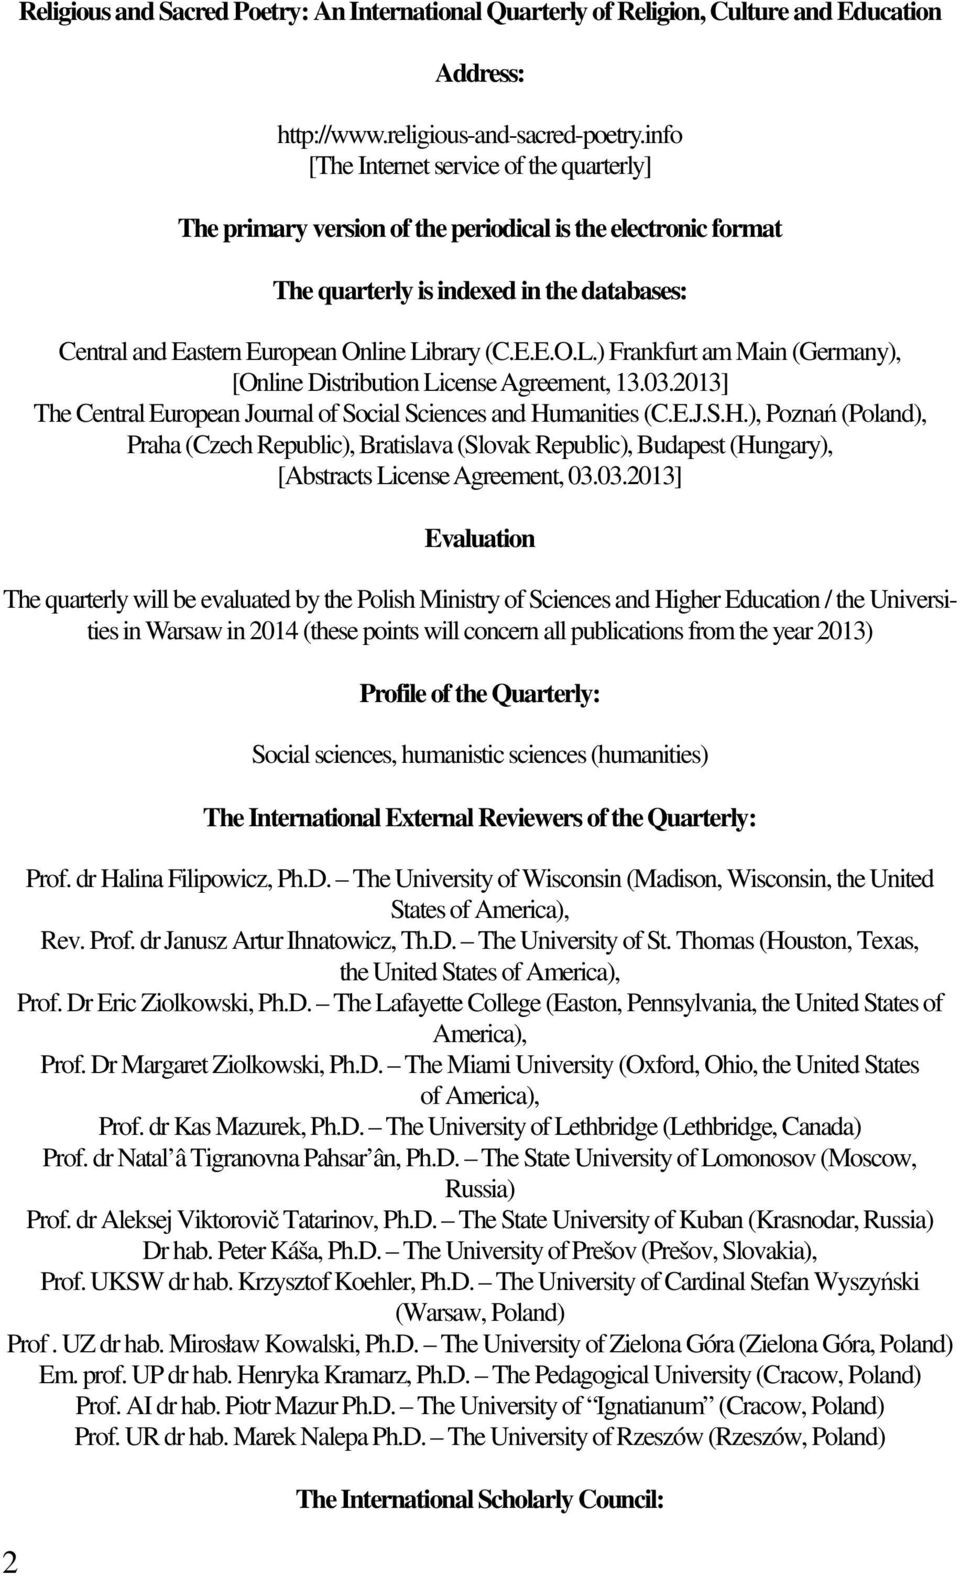 brary (C.E.E.O.L.) Frankfurt am Main (Germany), [Online Distribution License Agreement, 13.03.2013] The Central European Journal of Social Sciences and Hu